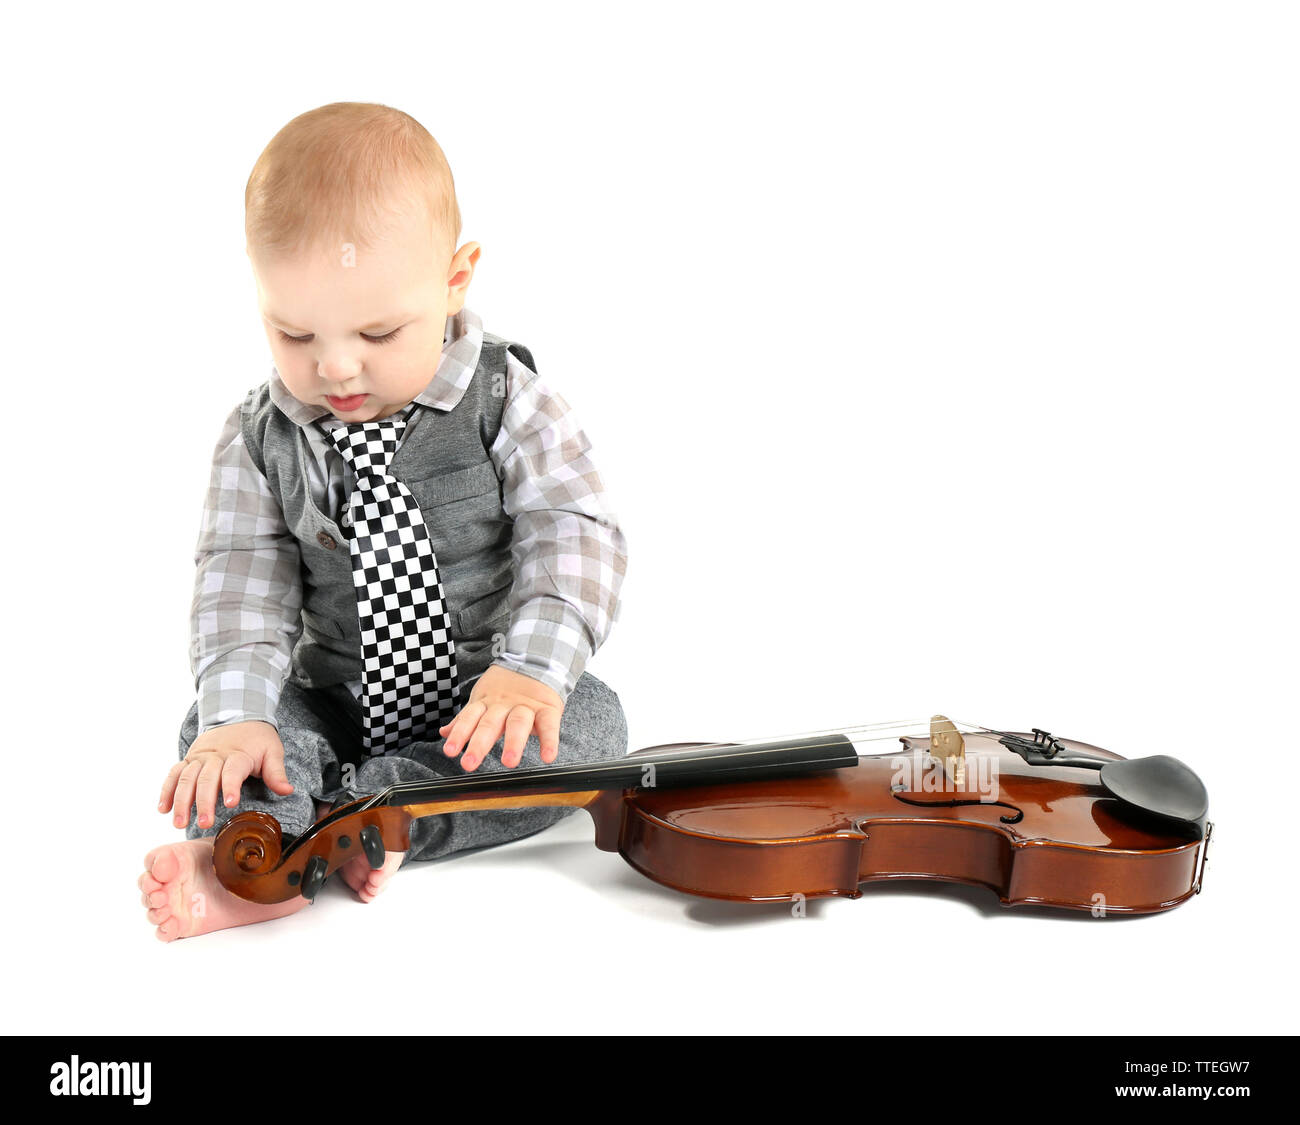 Cute baby with violin isolated on white background Stock Photo - Alamy